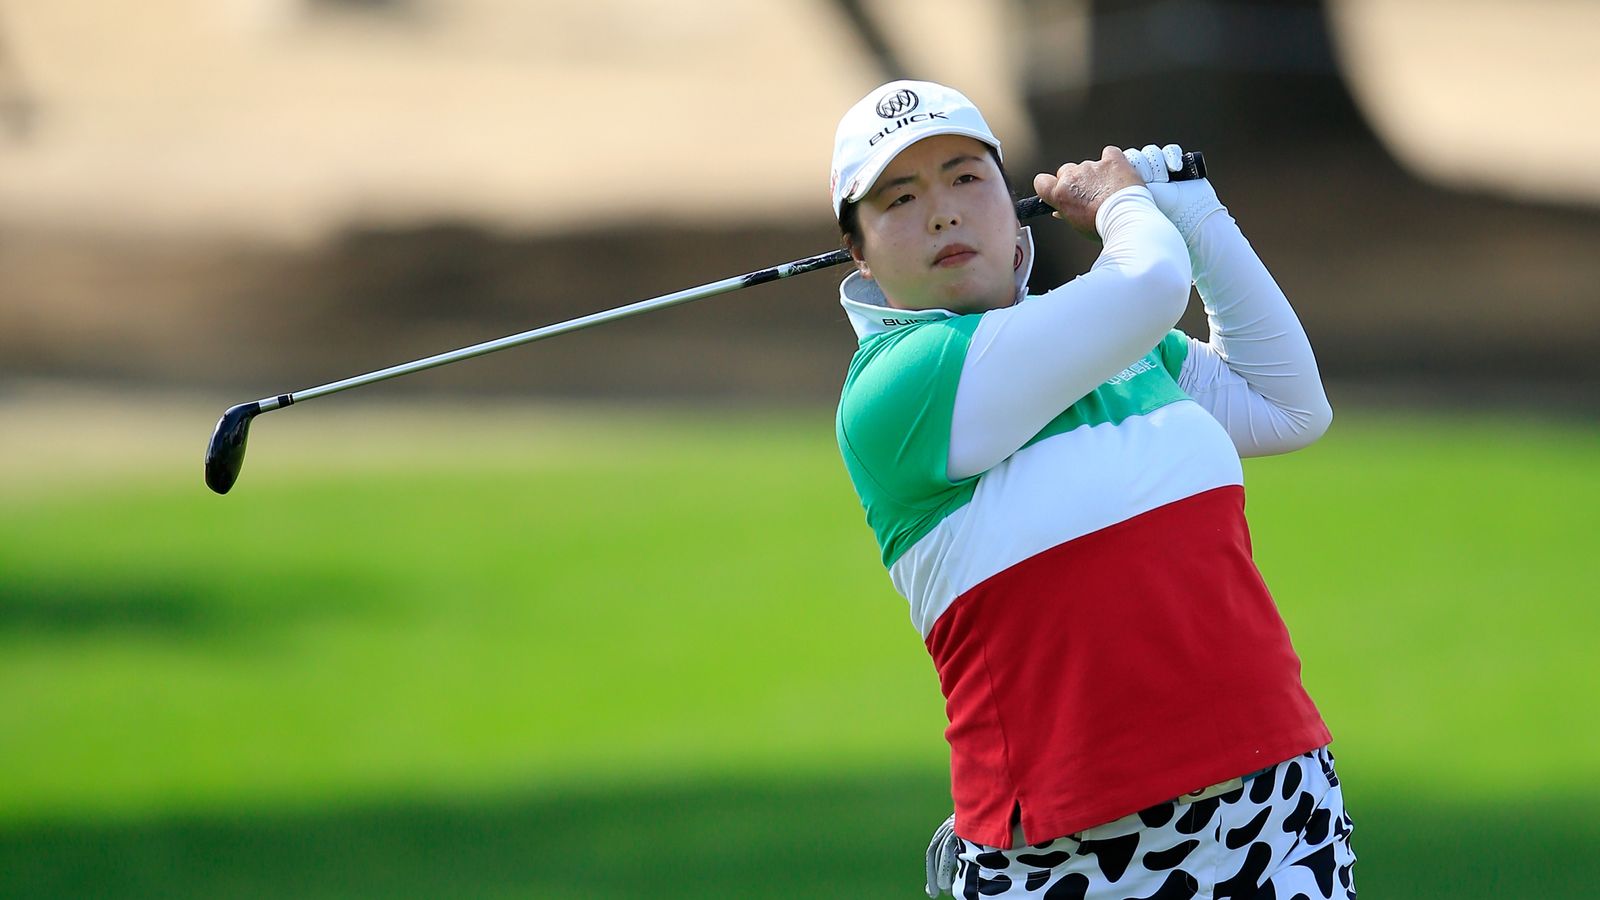 Shanshan Feng retains Buick Championship with play-off victory | Golf ...